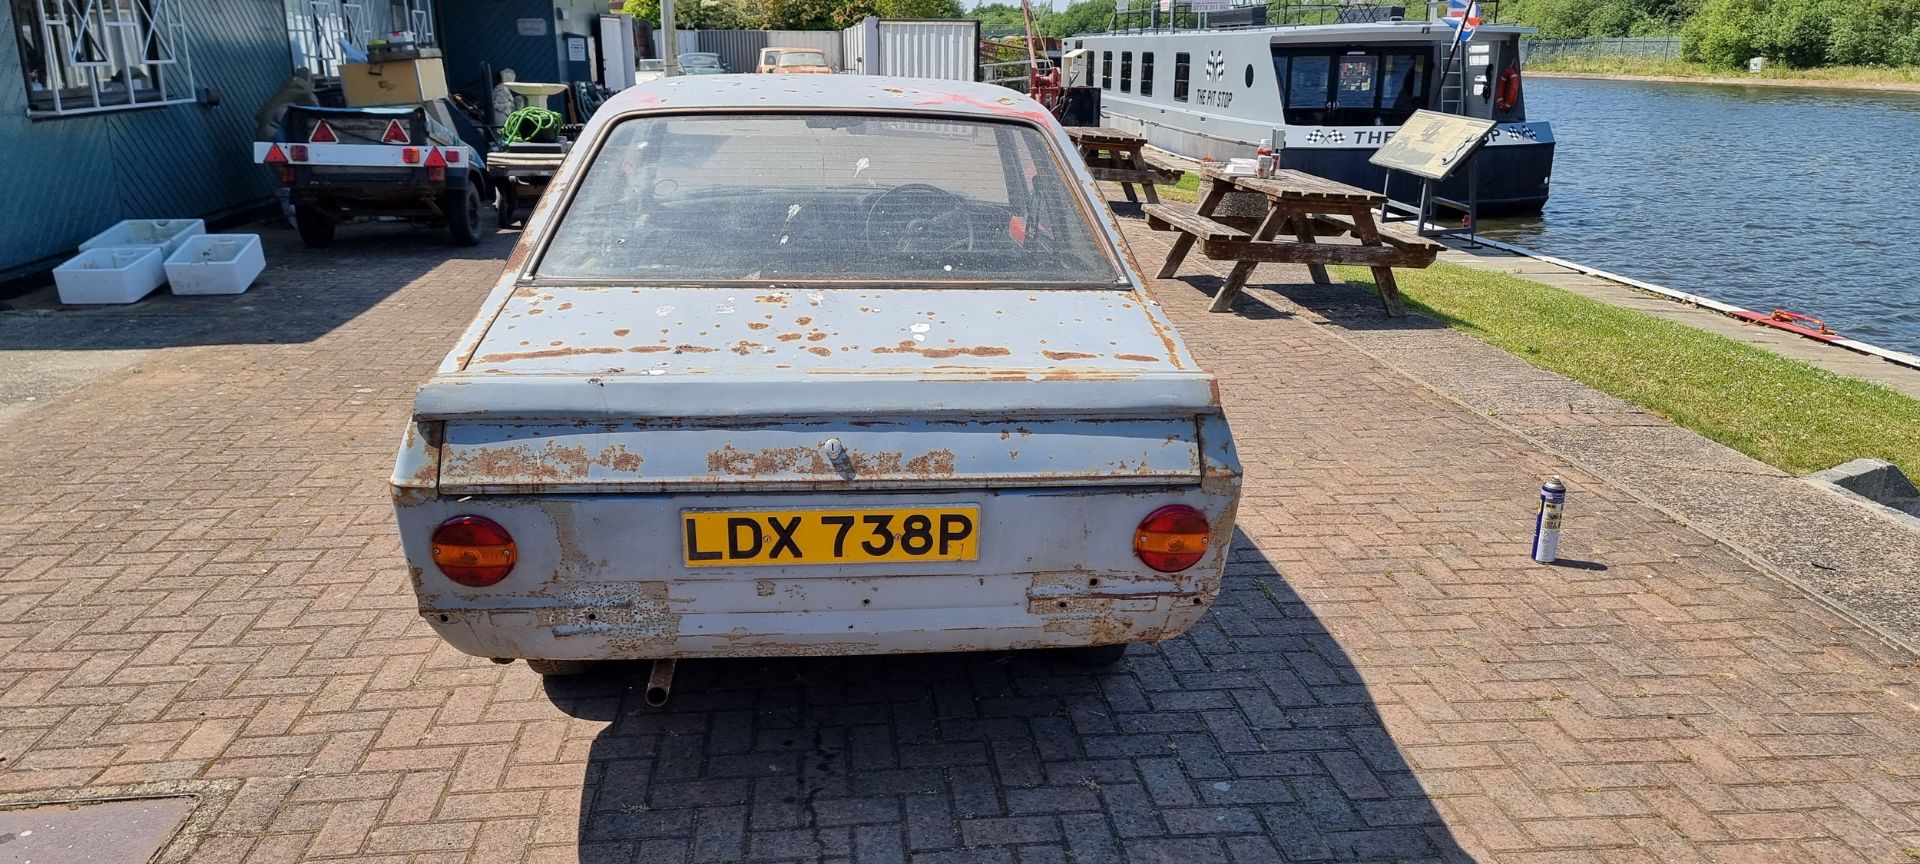 1975 Ford Escort 1.3L, 2 door, 1298cc, project. Registration number LDX 738P. Chassis number - Image 6 of 13